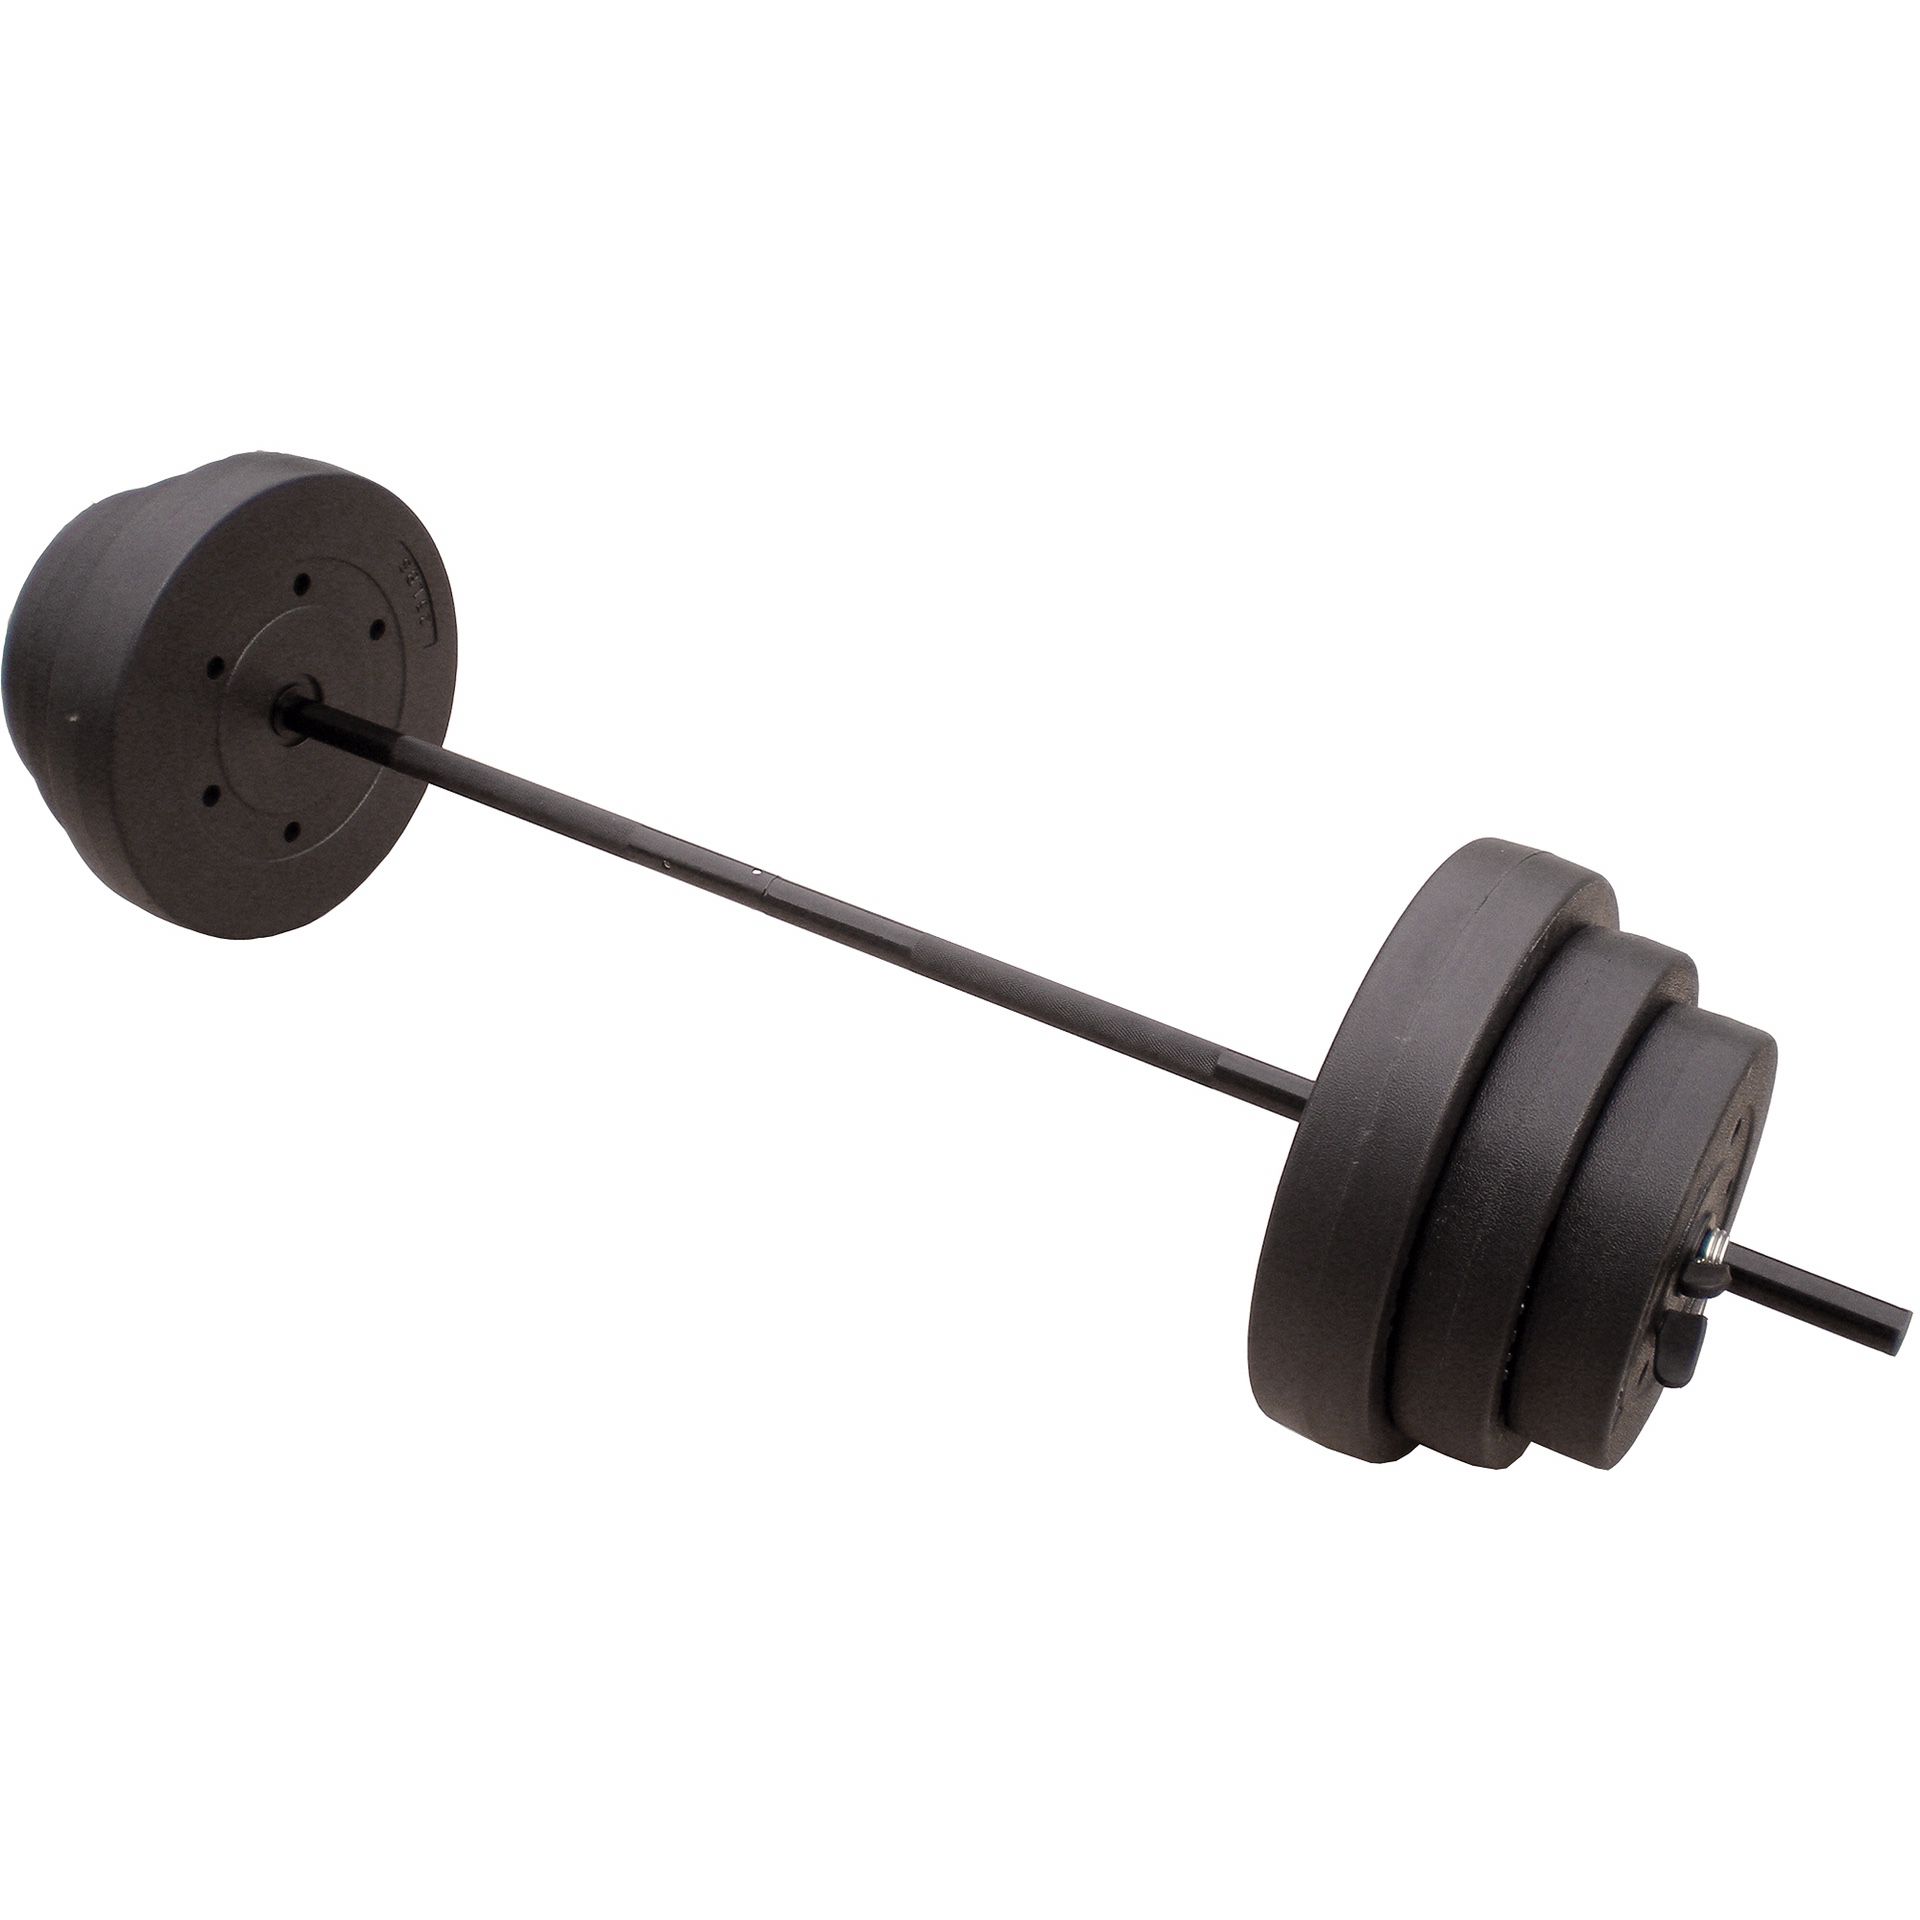 $100 (100Lb weight set with barbell)